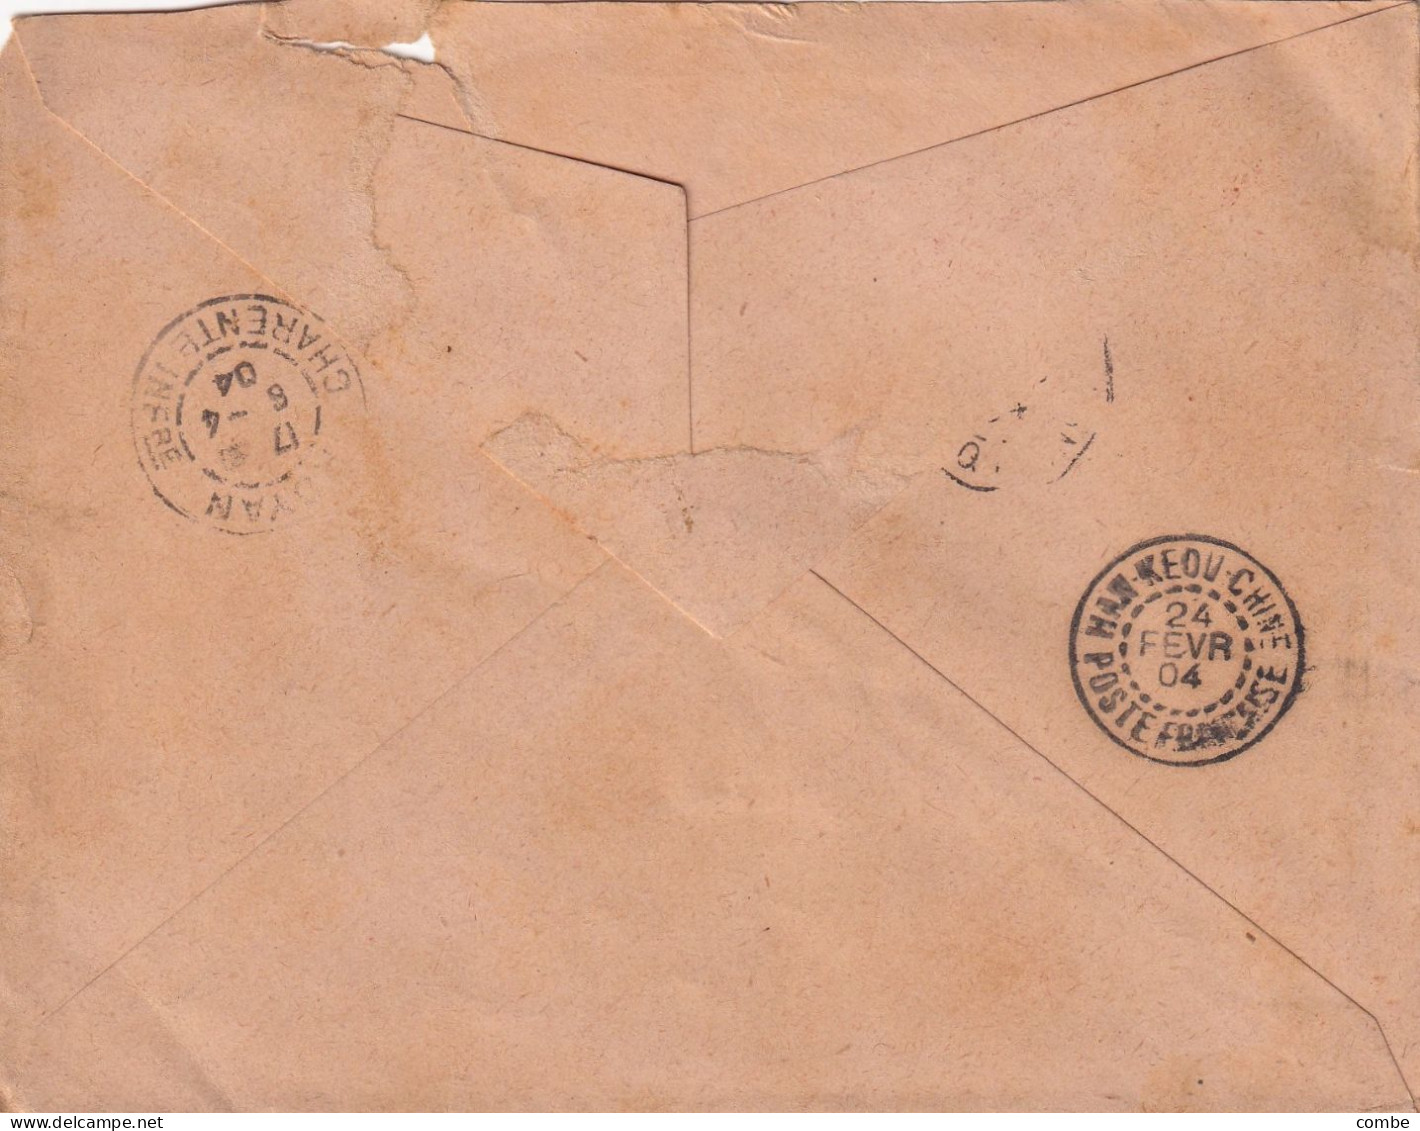 LETTRE. CHINE SAGE. COVER CHINA. TCHONG KING. 14 FEVR 1904. Yv N° 11. HAN KEOU-CHINE. POSTE FRANCAISE. POUR FRANCE - Covers & Documents